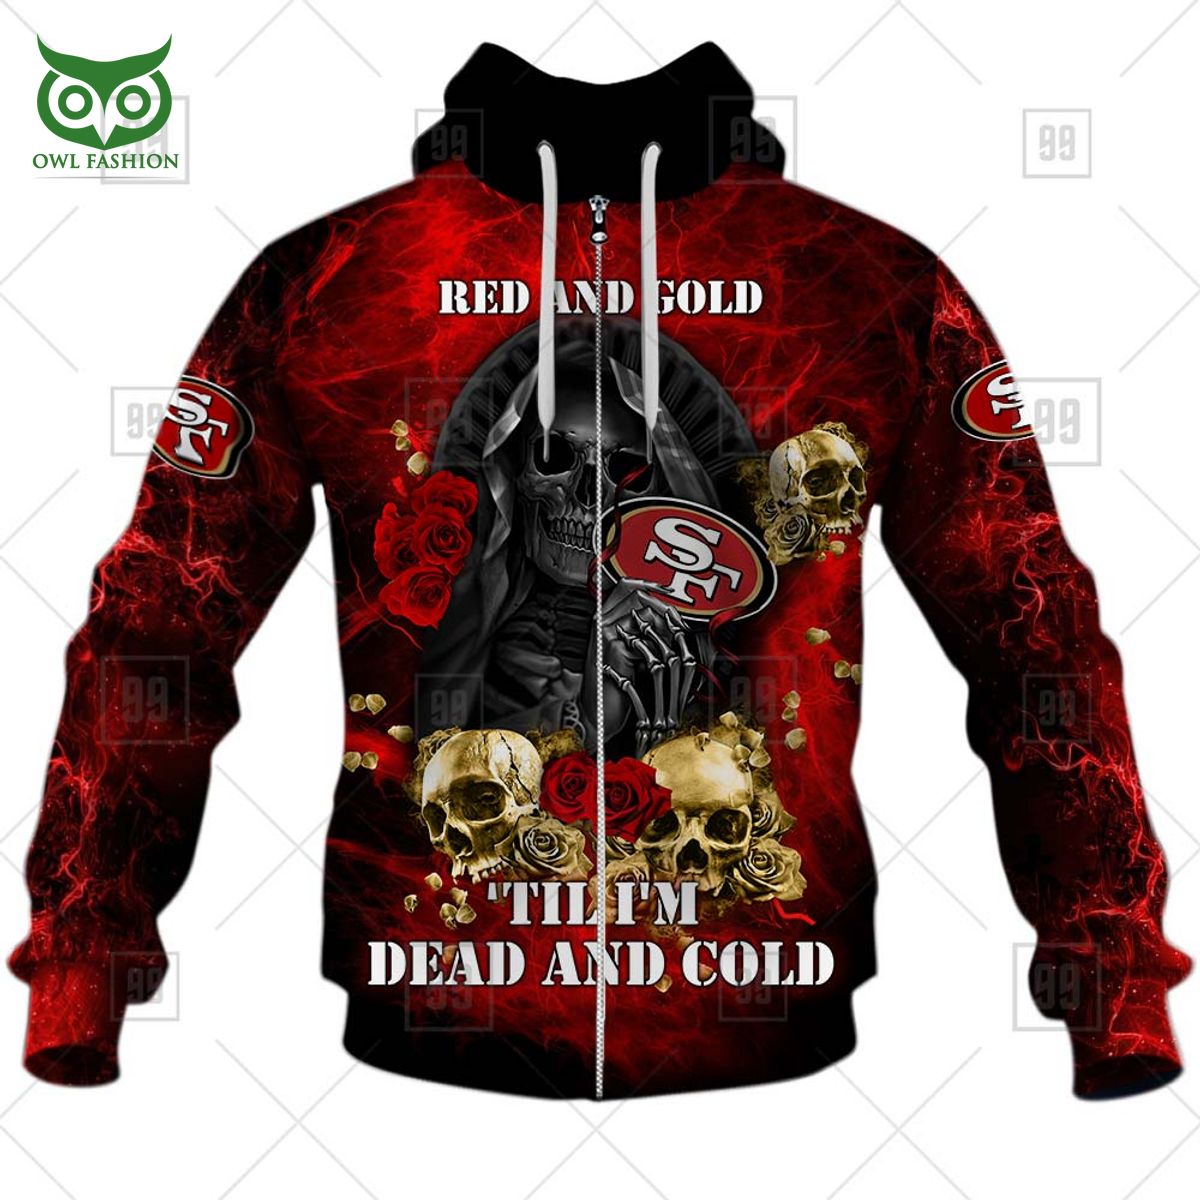 nfl san francisco 49ers fire skull red and gold 3d hoodie shirt longsleeve 5 bWPpA